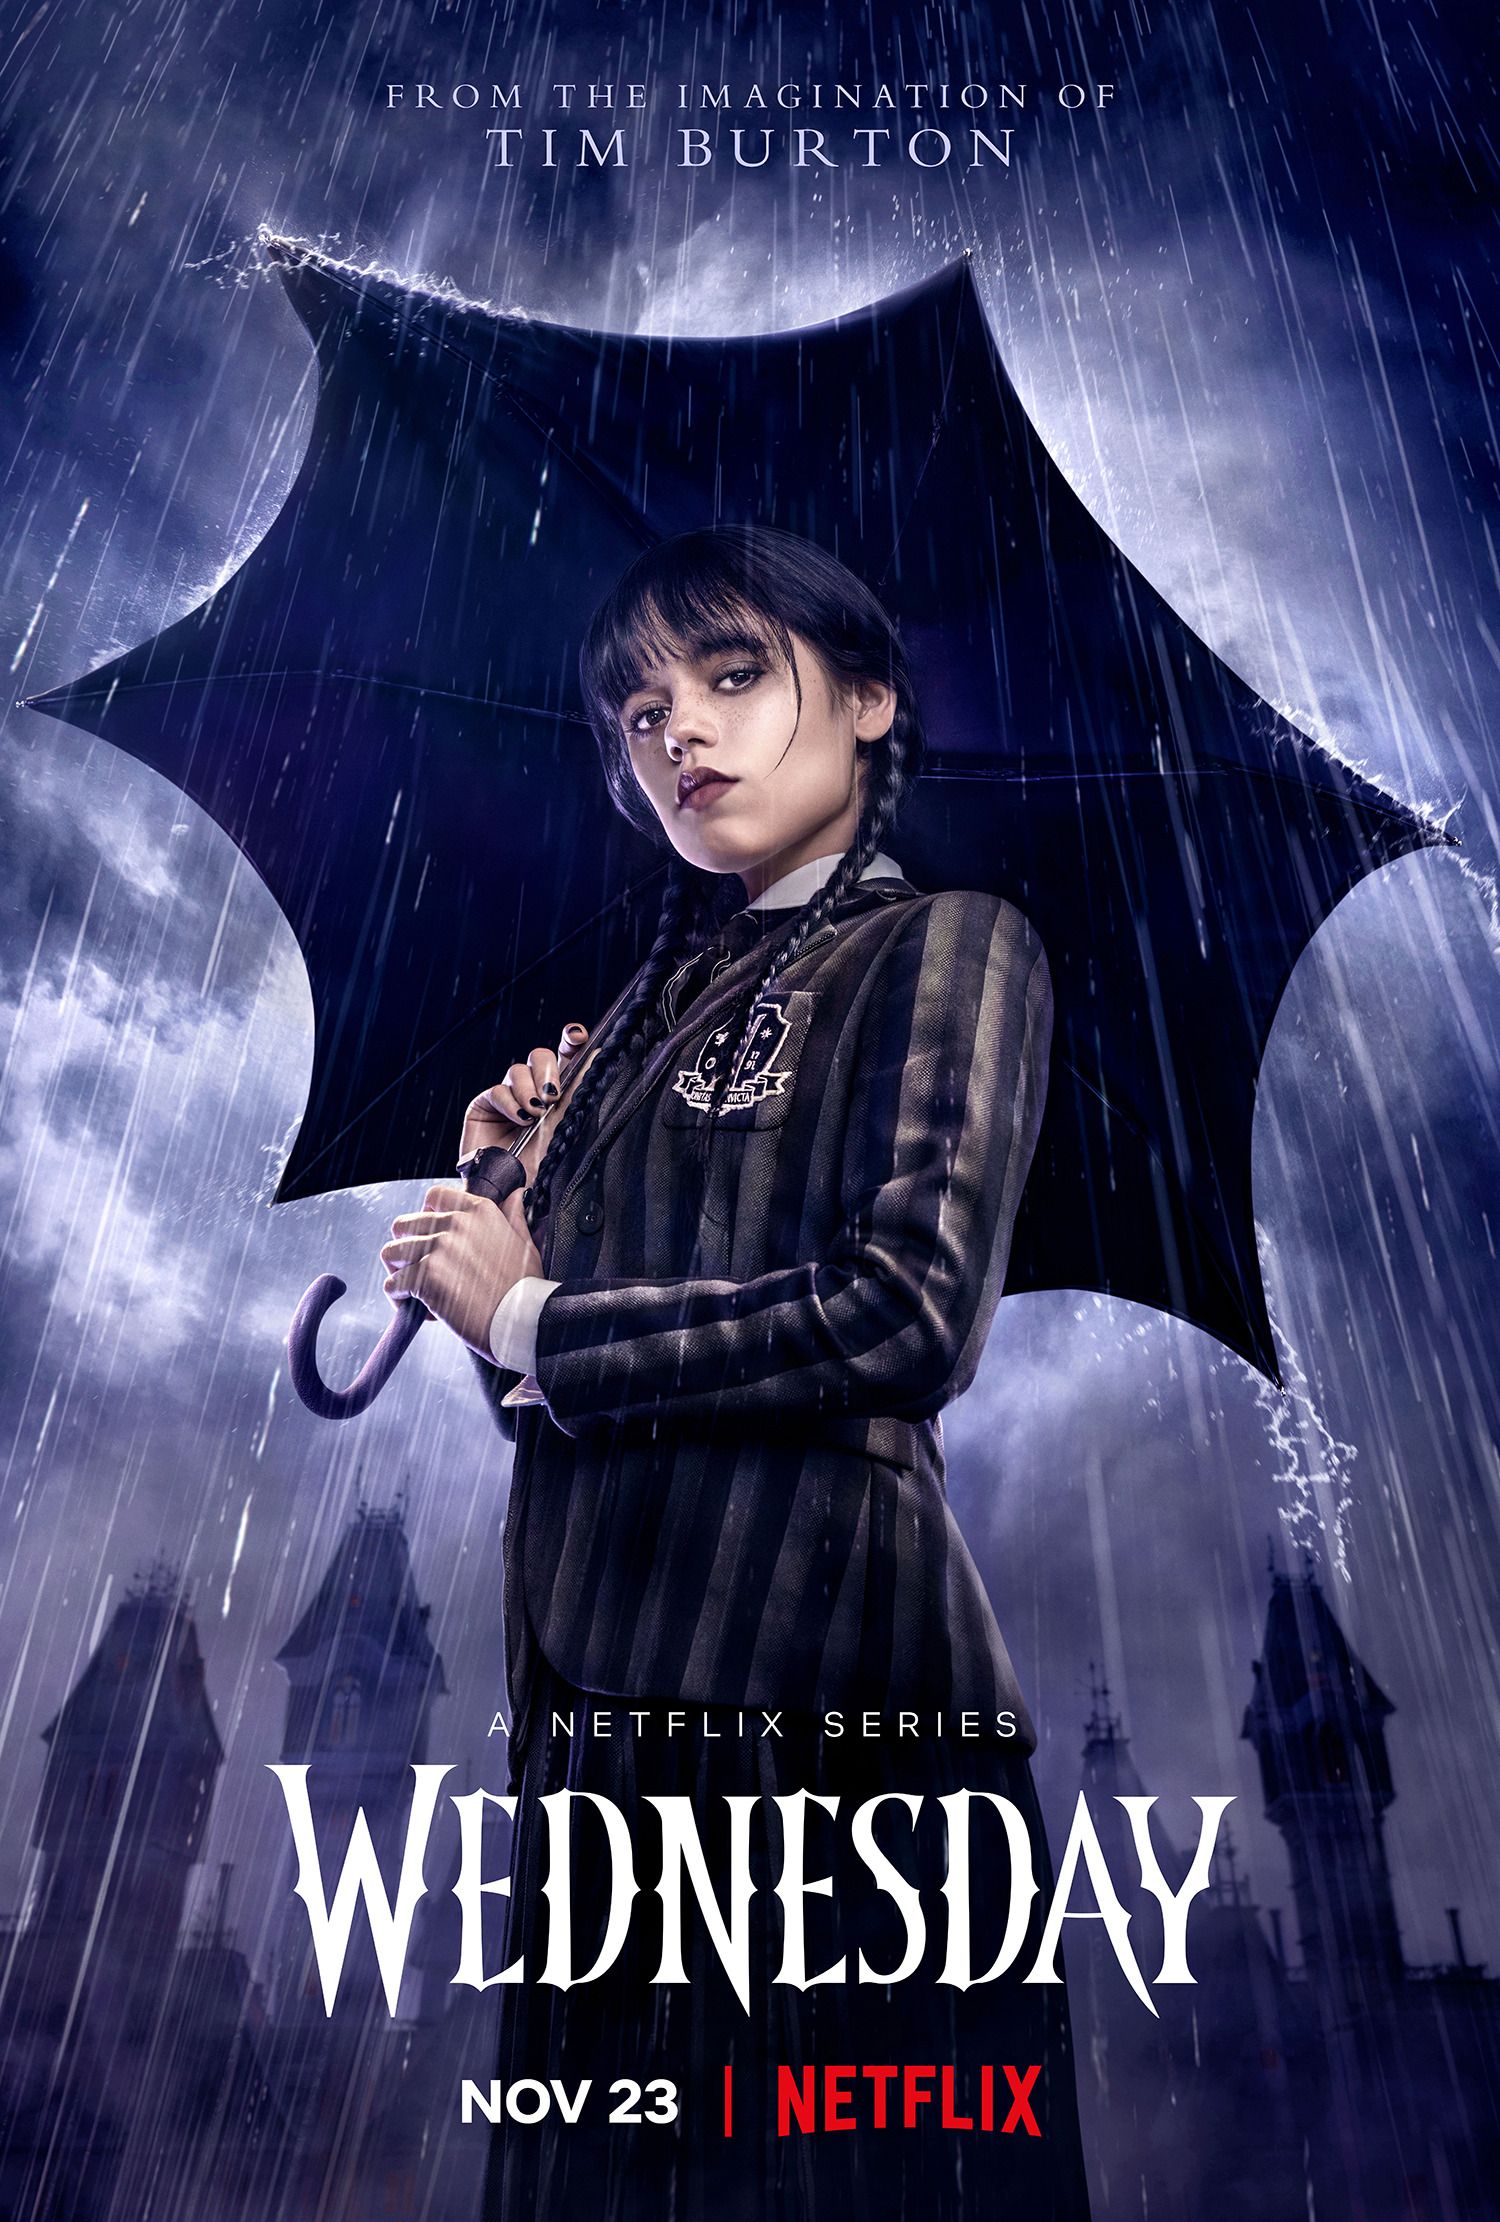 wednesday season 2 brings back another major star from the addams family movies